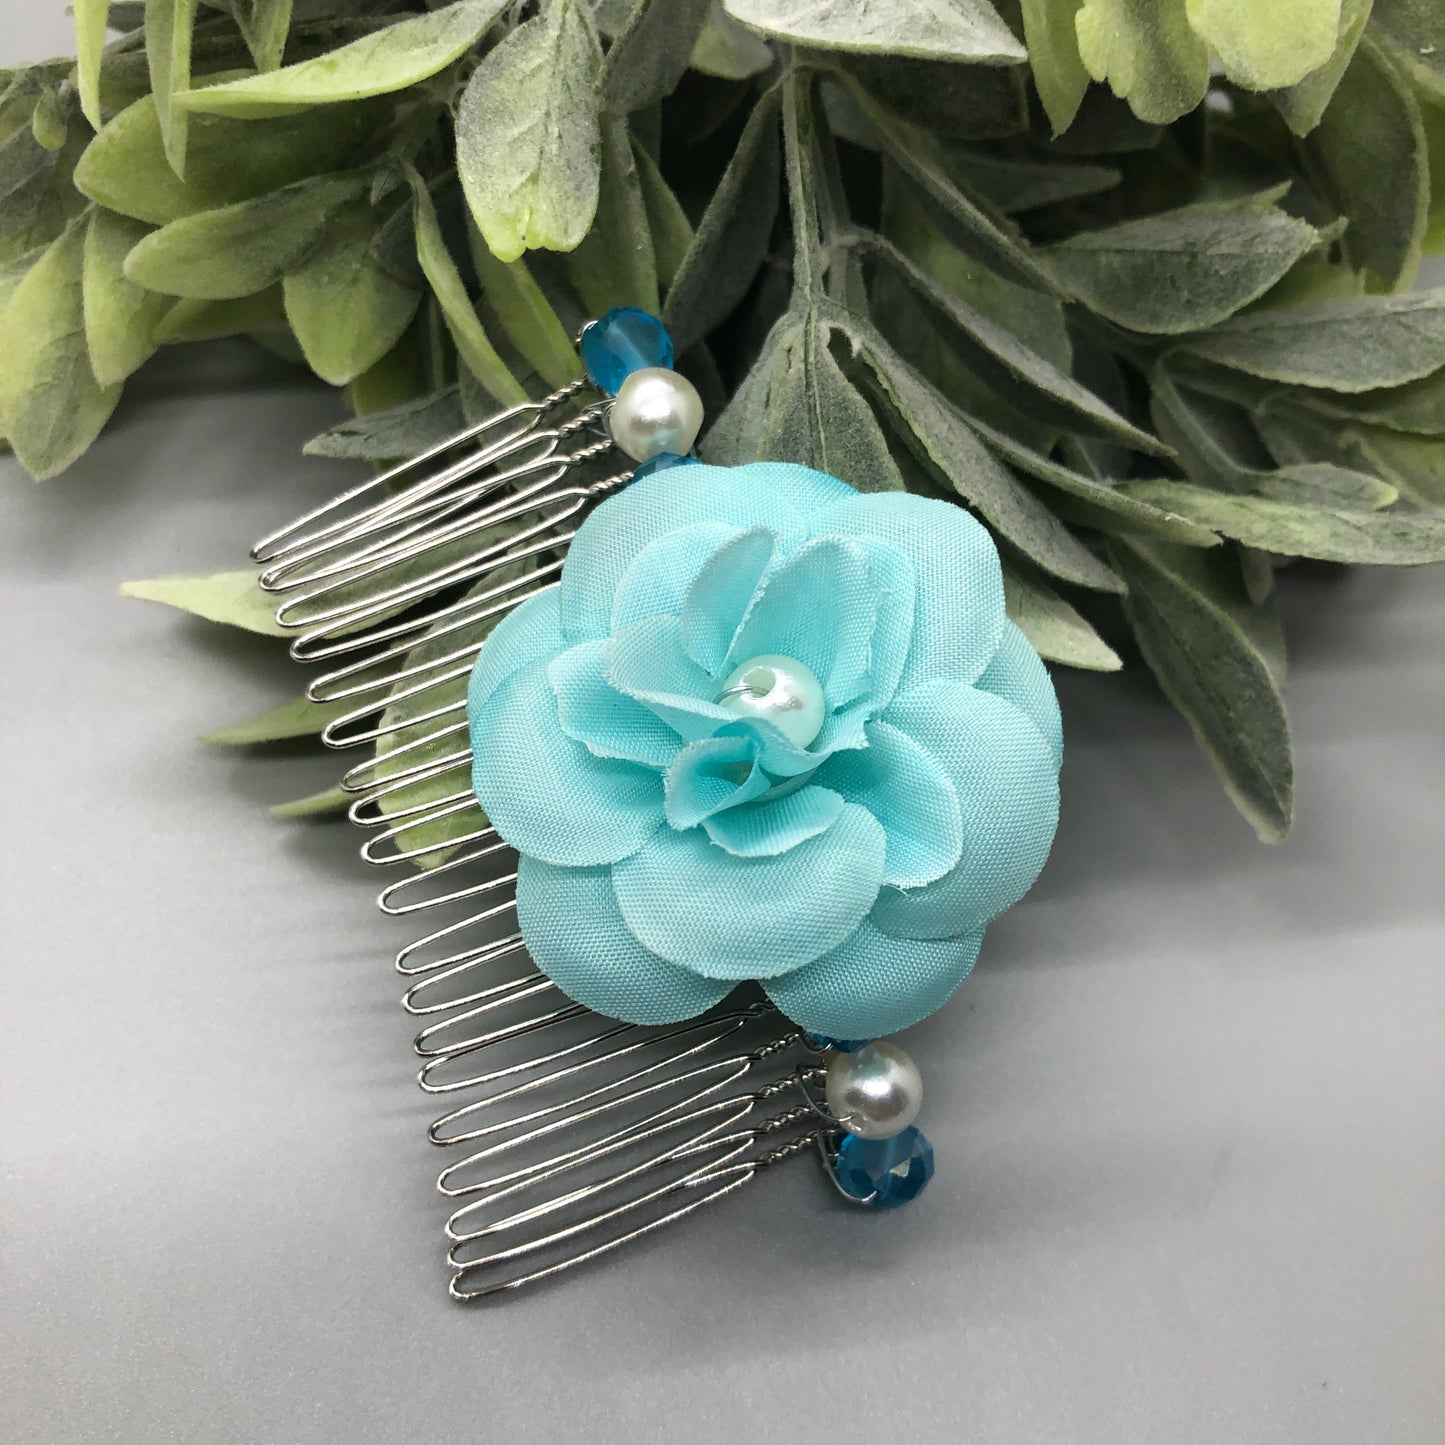 Baby Teal Flower Teal White  Beads 3.5' Metal Side Comb Retro Vintage Style 1 pc